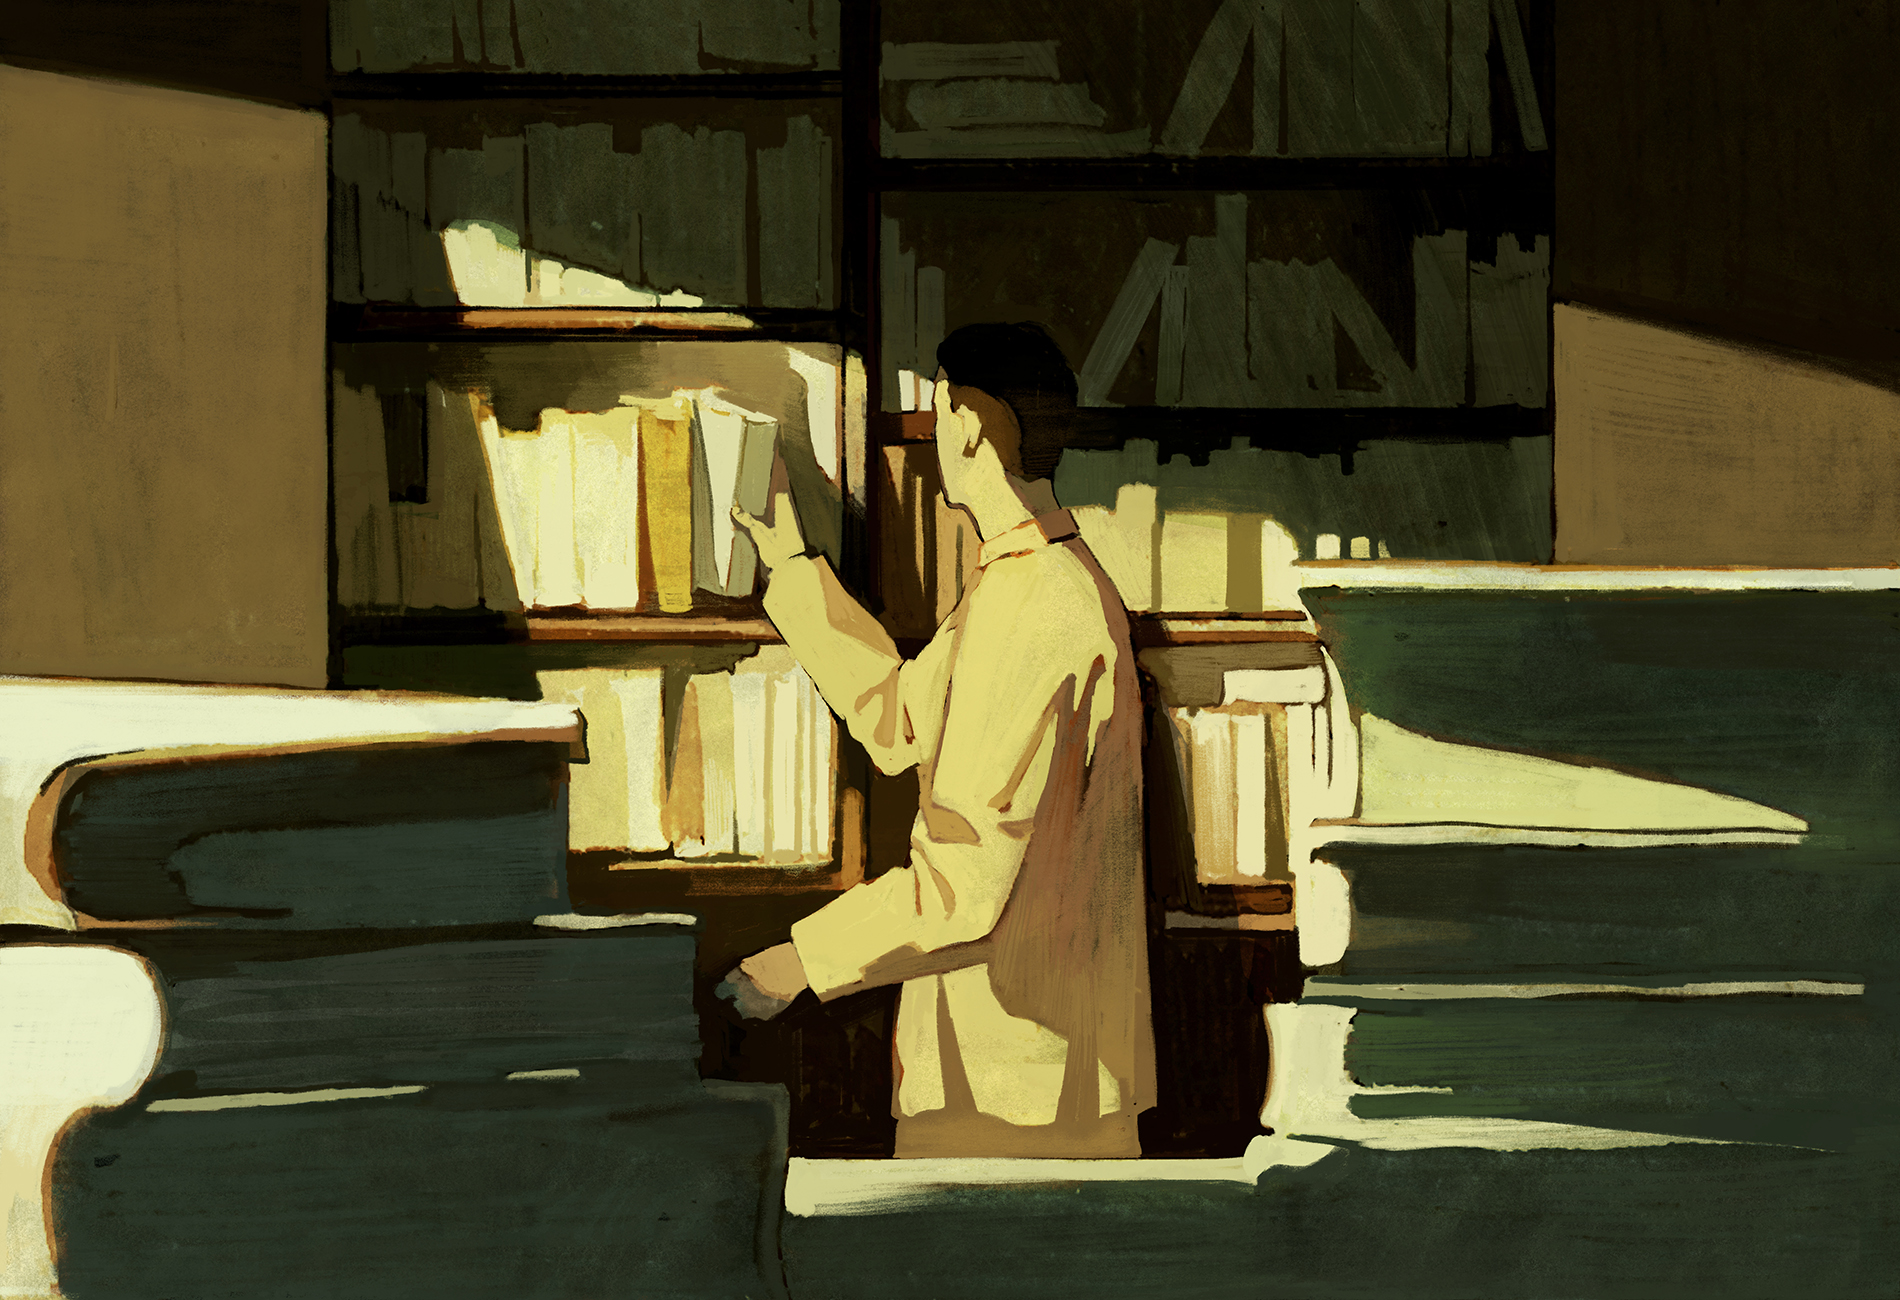 In this illustration, a man is shelving books in a peaceful library, standing in sunlight.